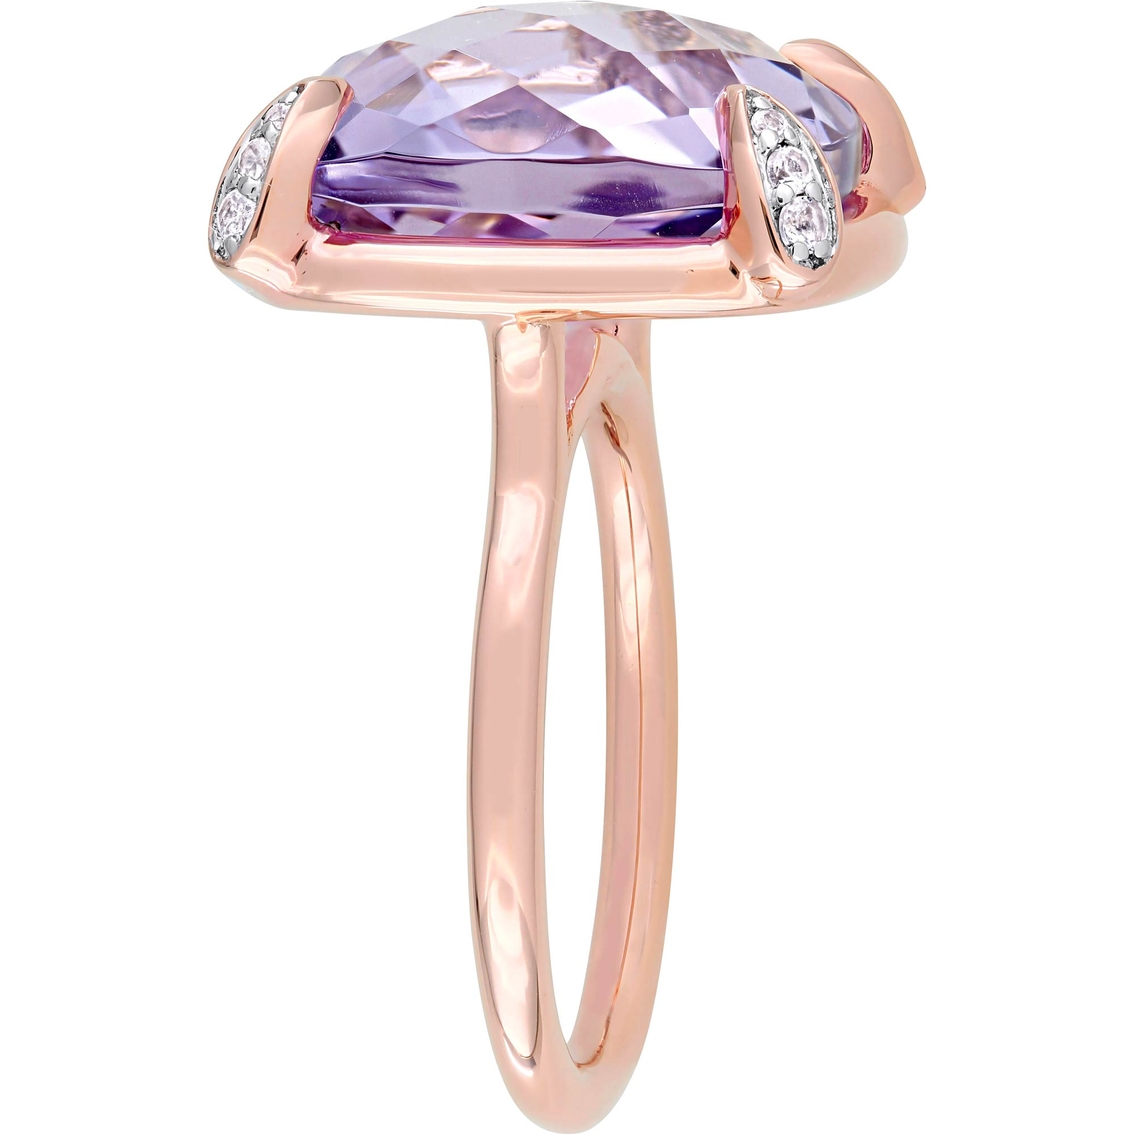 Sofia B. 14K Rose Gold Pink Amethyst White Sapphire Ring - Image 3 of 4